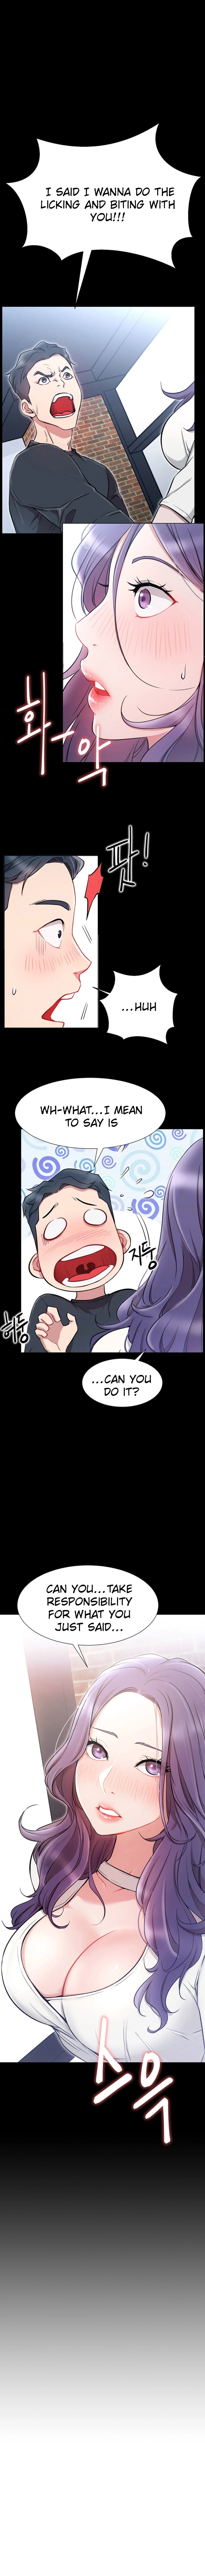 do-you-want-to-collab-chap-8-4